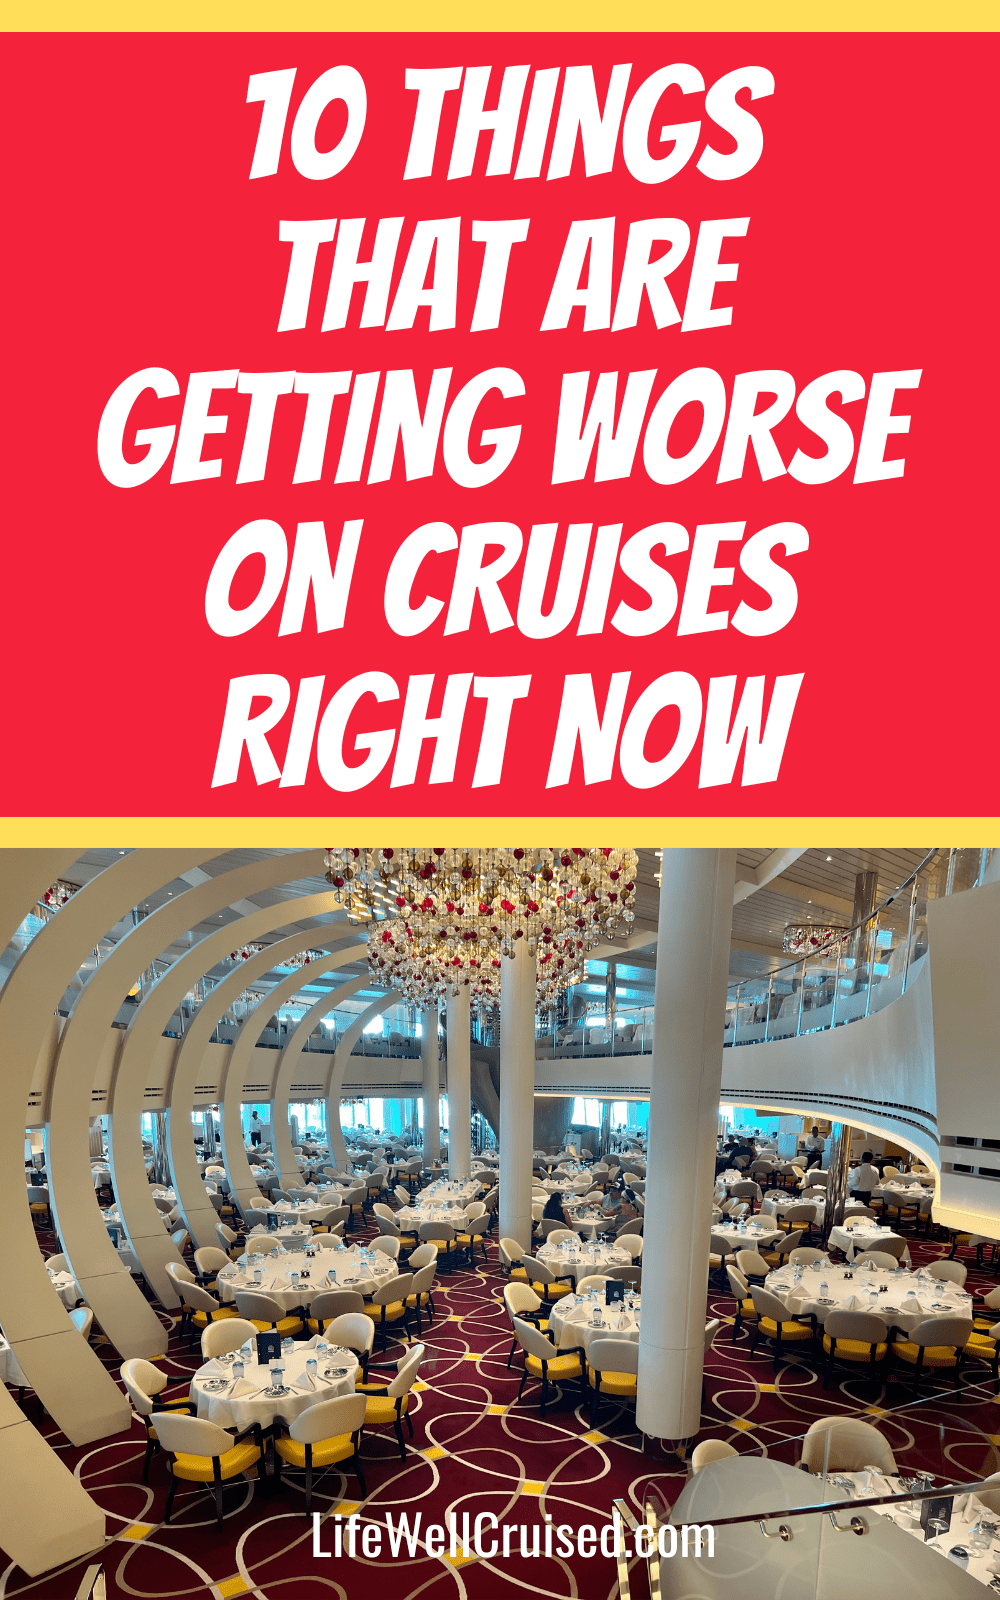 10 things that are getting worse on cruises right now